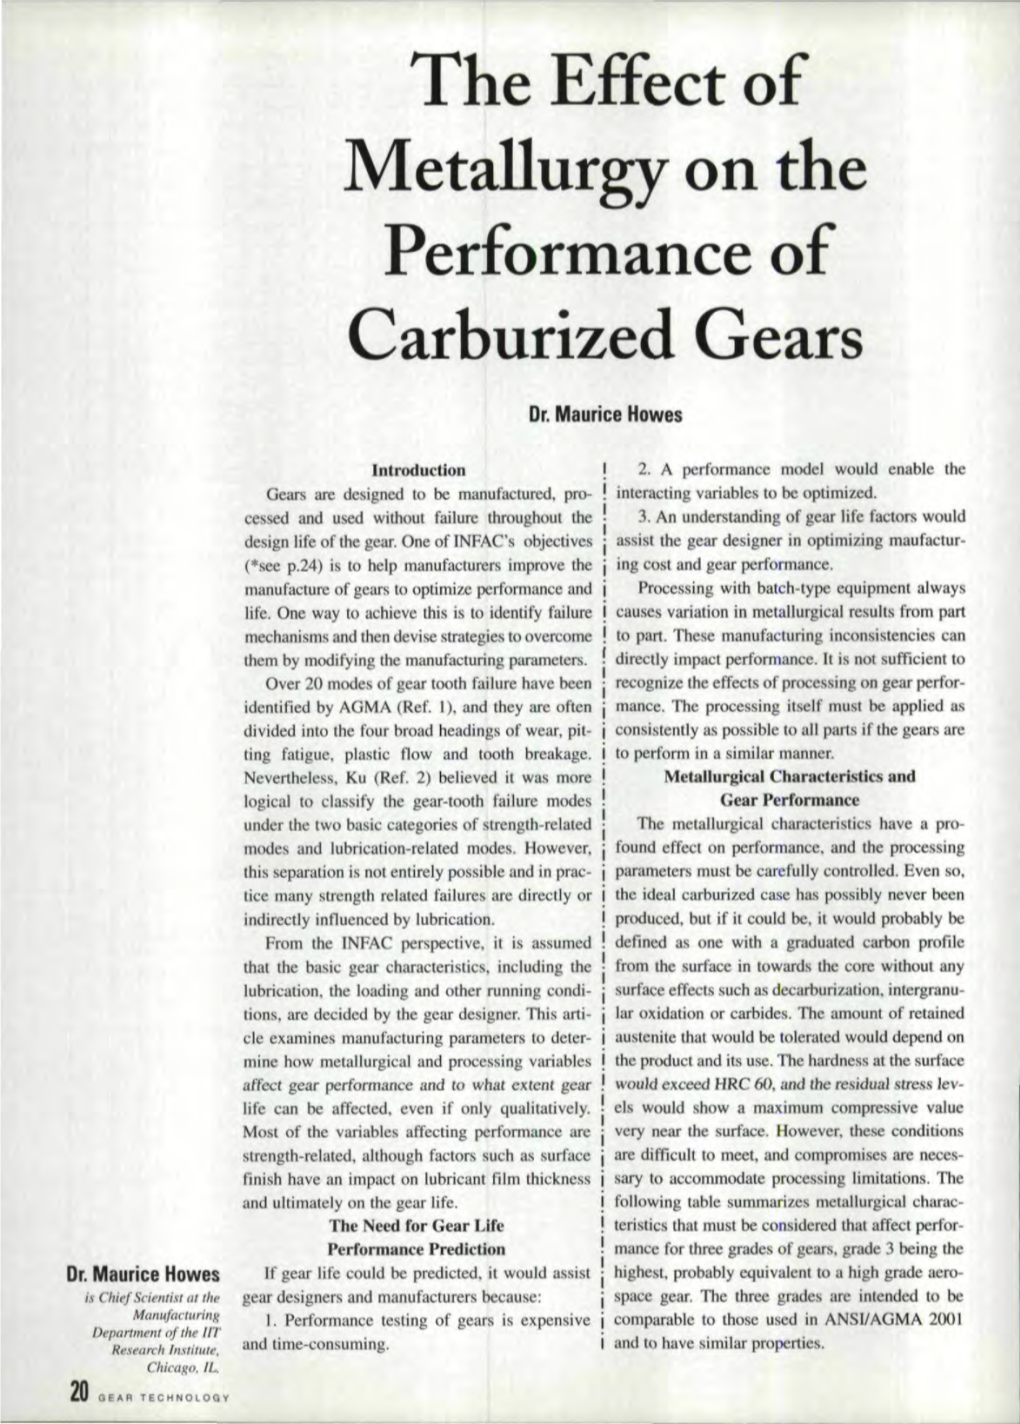 The Effect of Metallurgy on the Performance of Carburized Gears